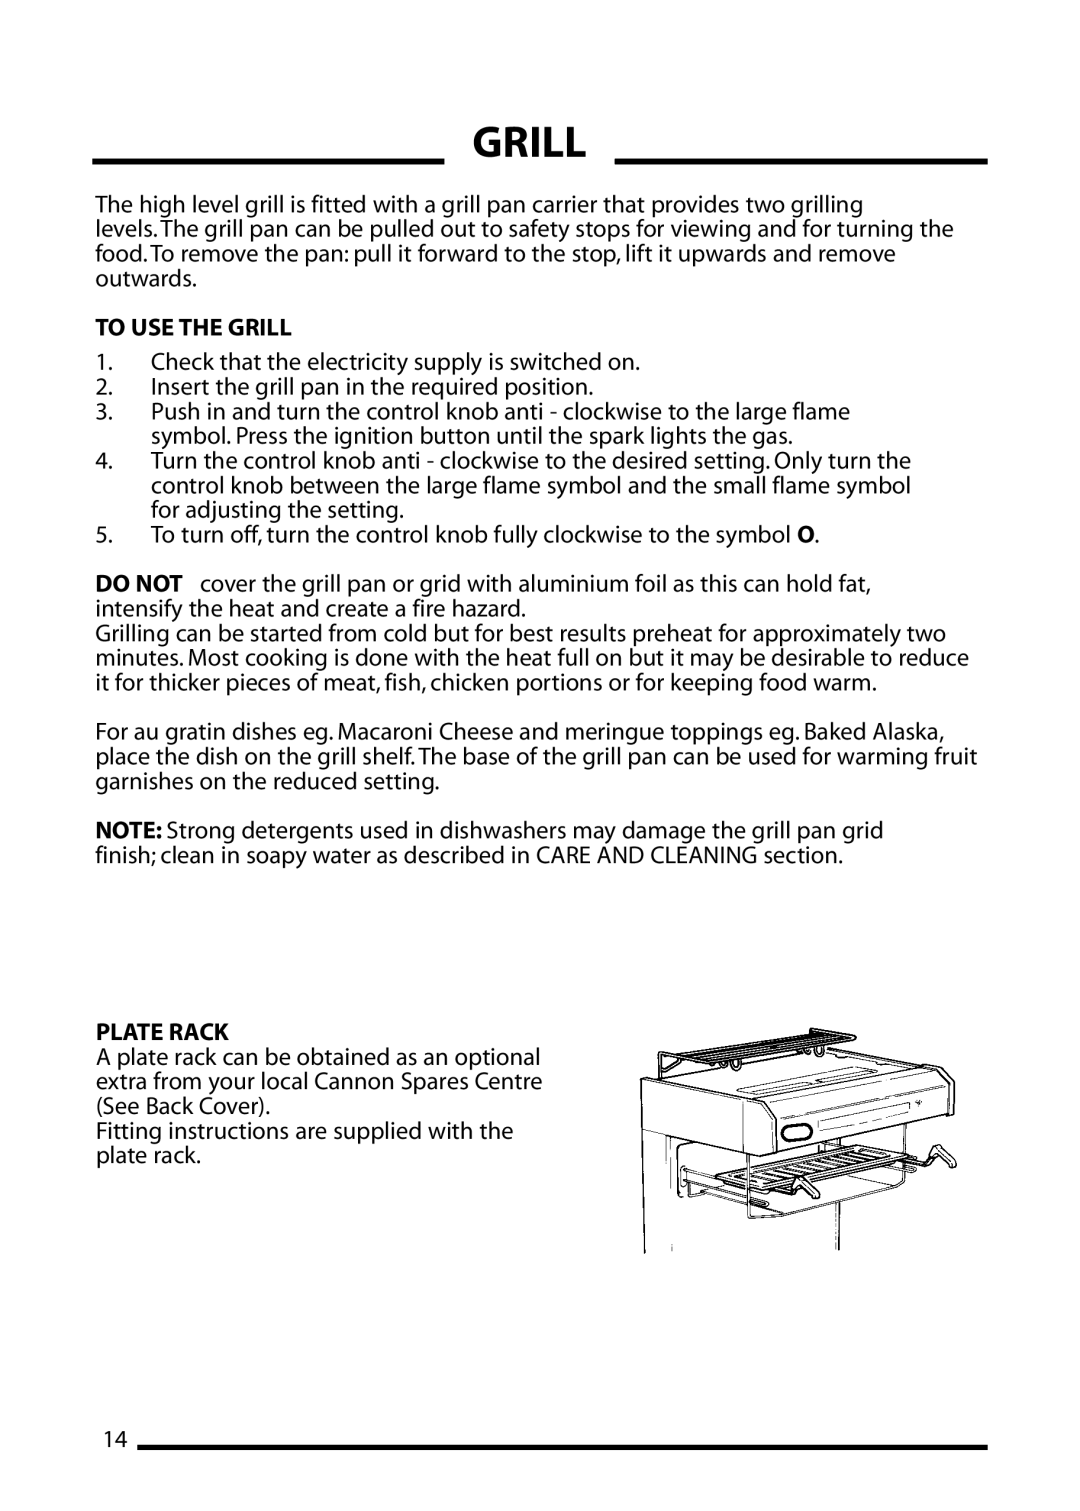 Cannon 10552G, 10555G, 10550G, 10556G installation instructions To Use The Grill, Plate Rack 